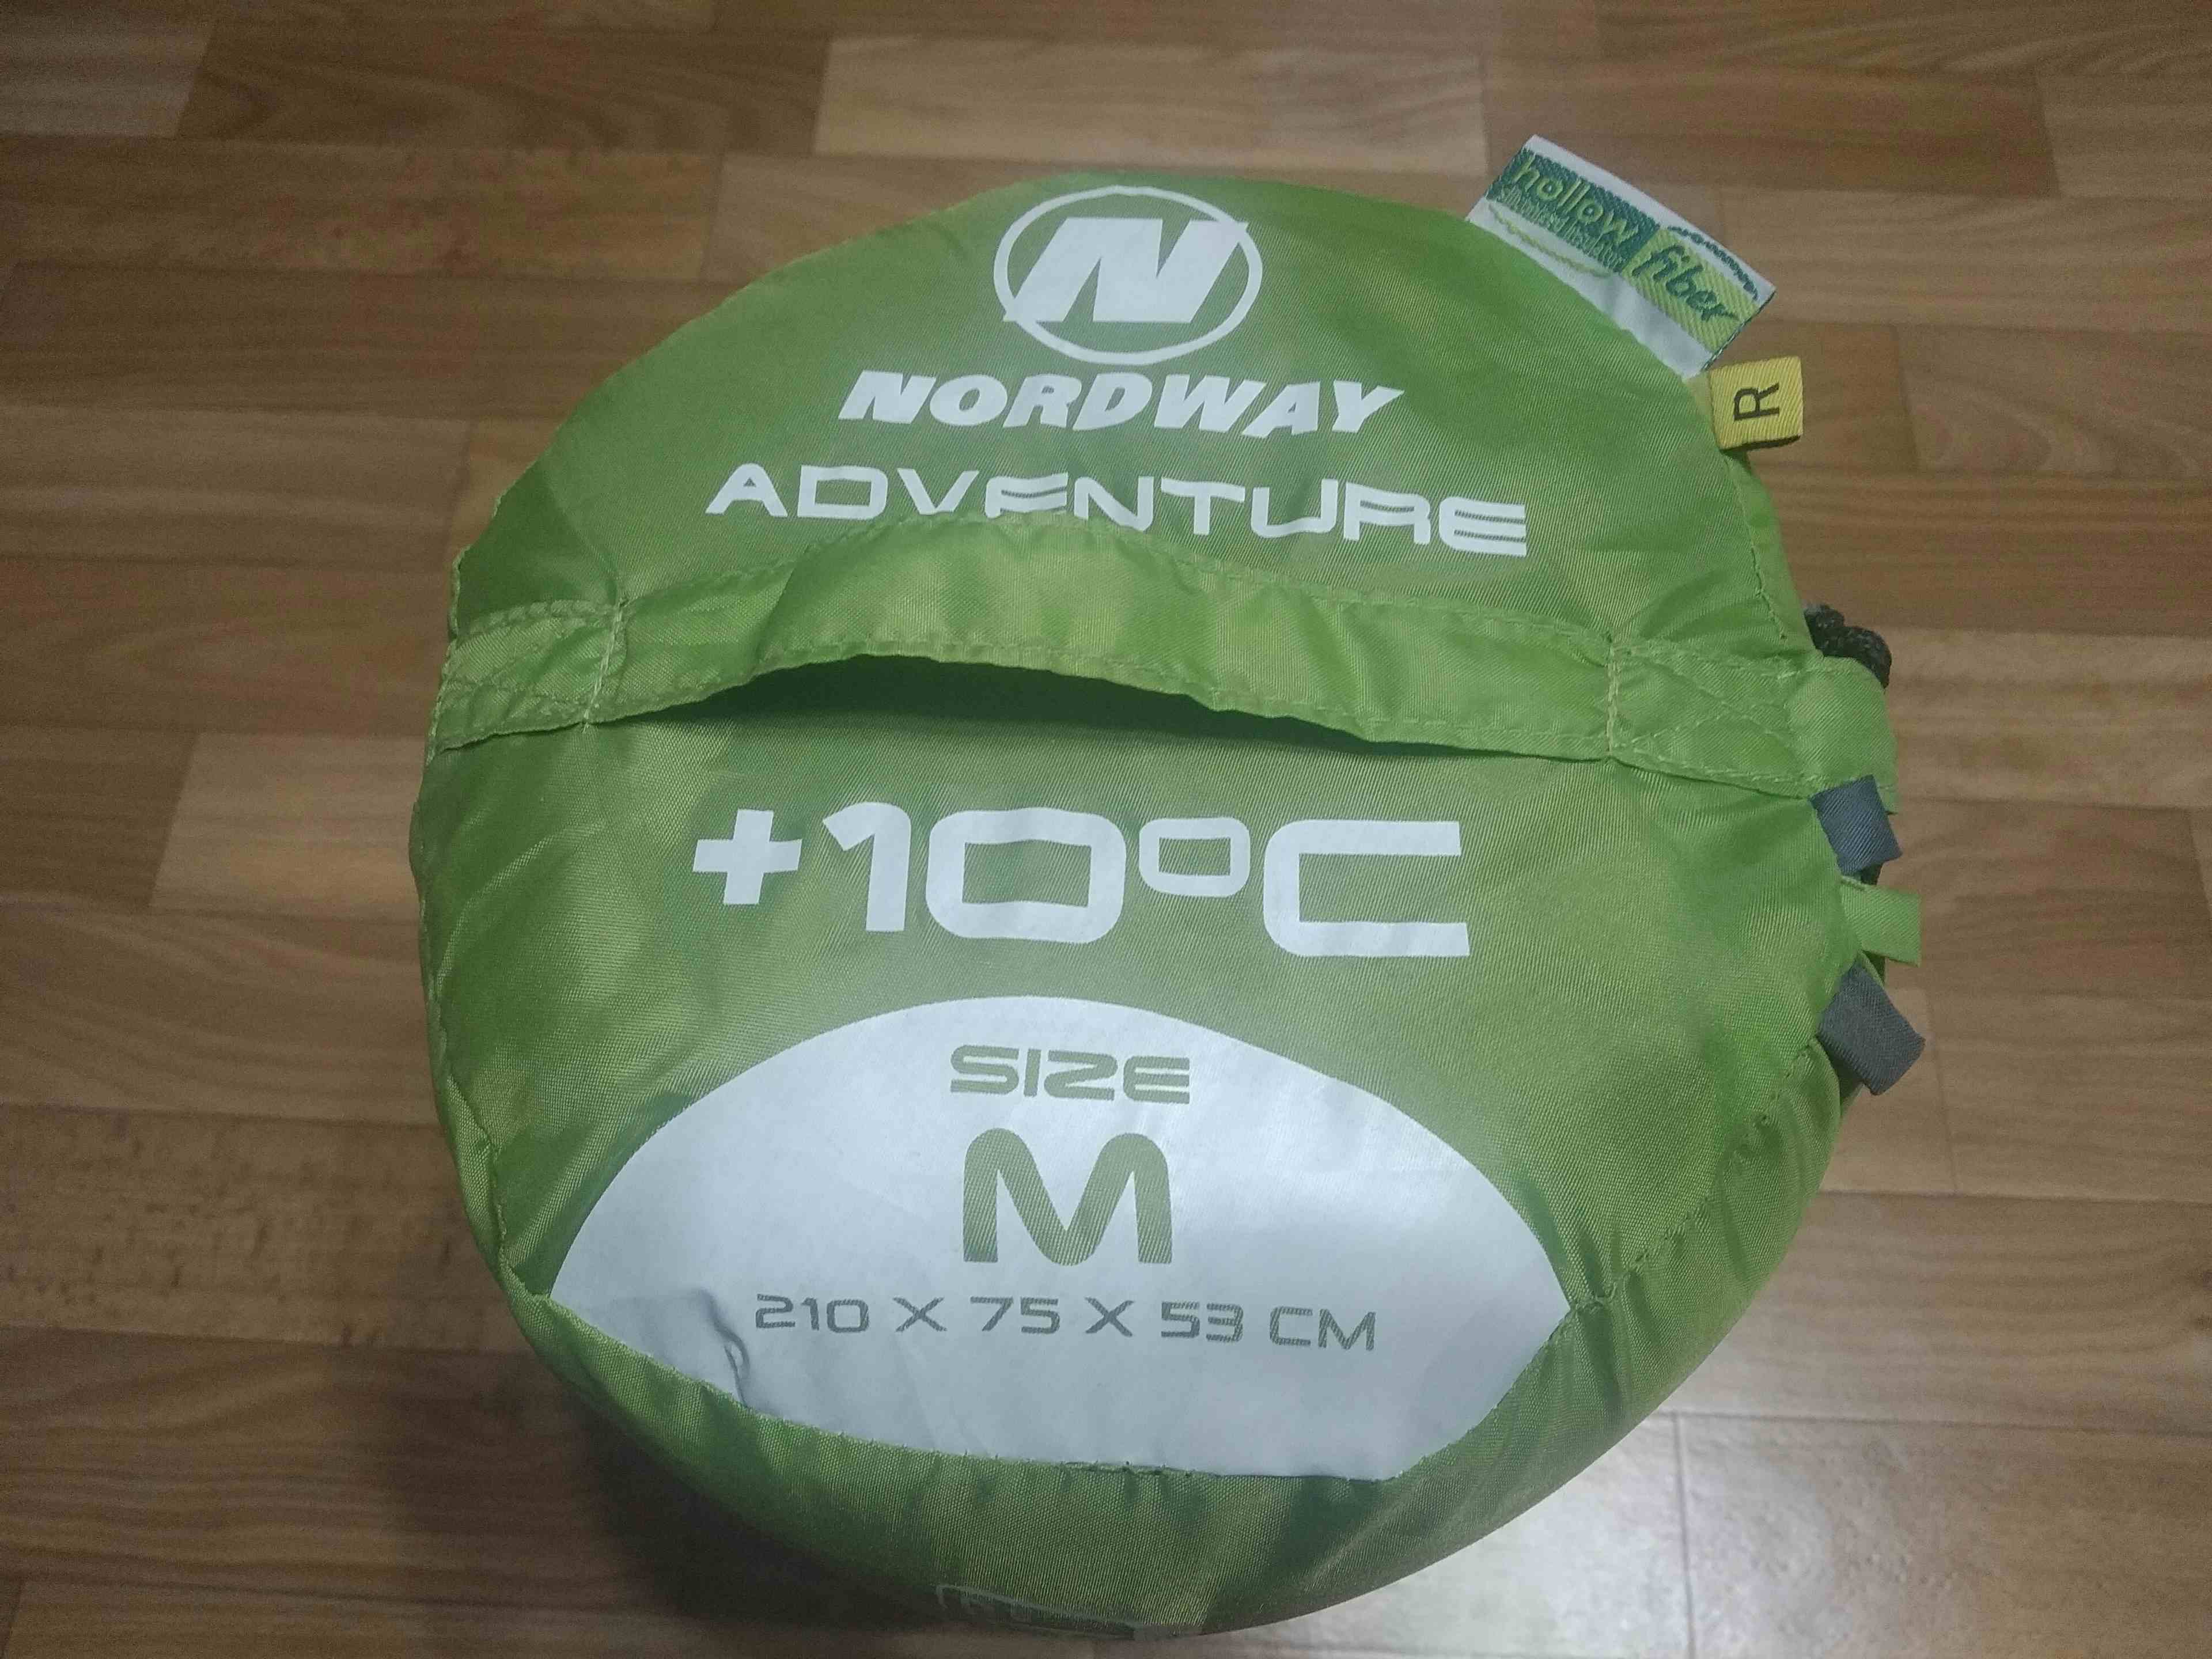 Primary picture of Спальный мешок Nordway Adventure +10